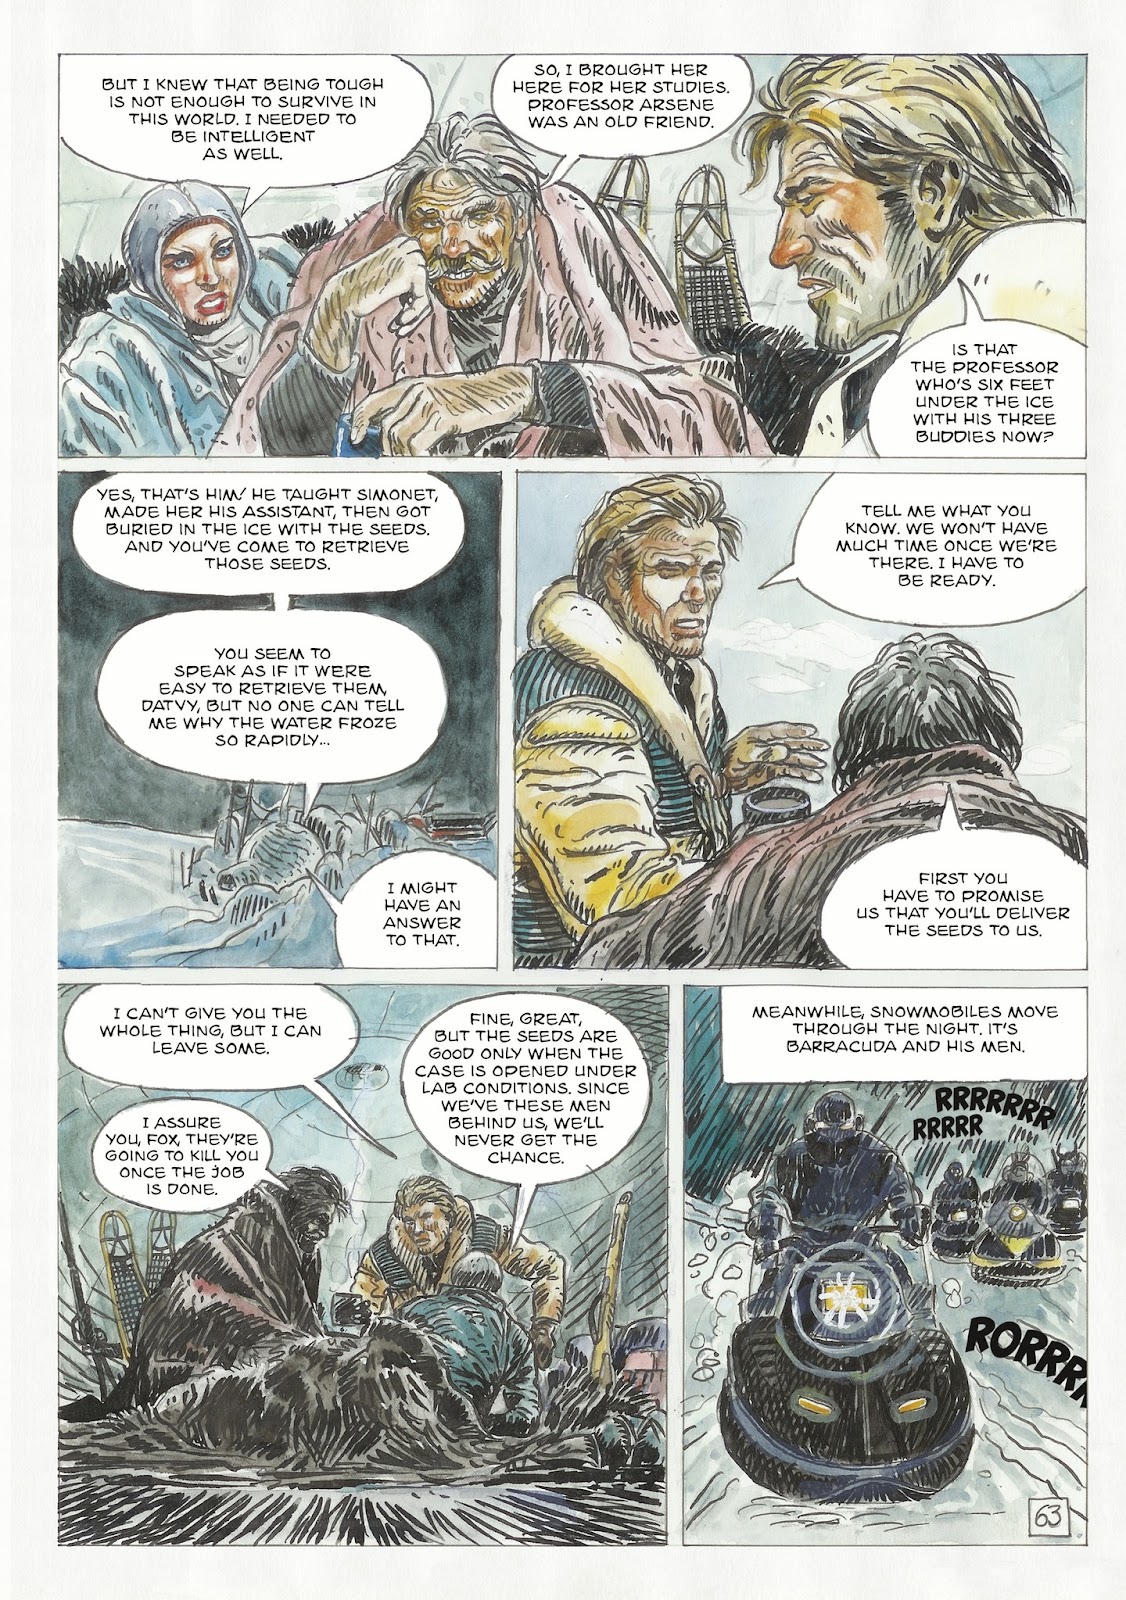 The Man With the Bear issue 2 - Page 9